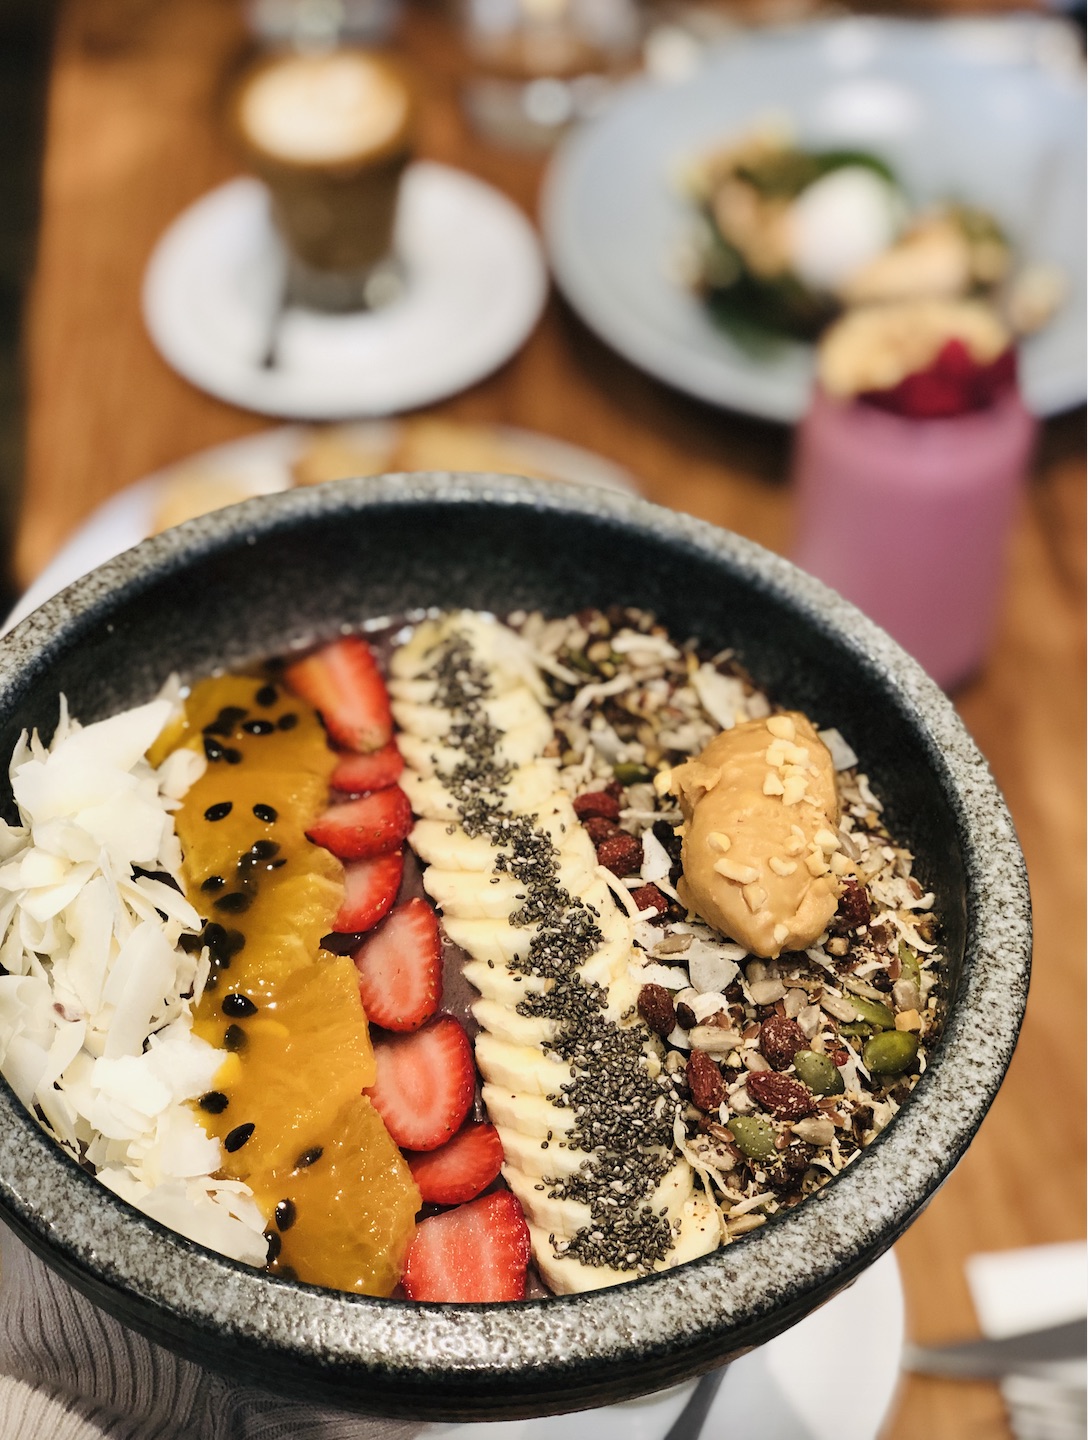 Acai Bowl(GF, VG) from St Rose, All Day Menu